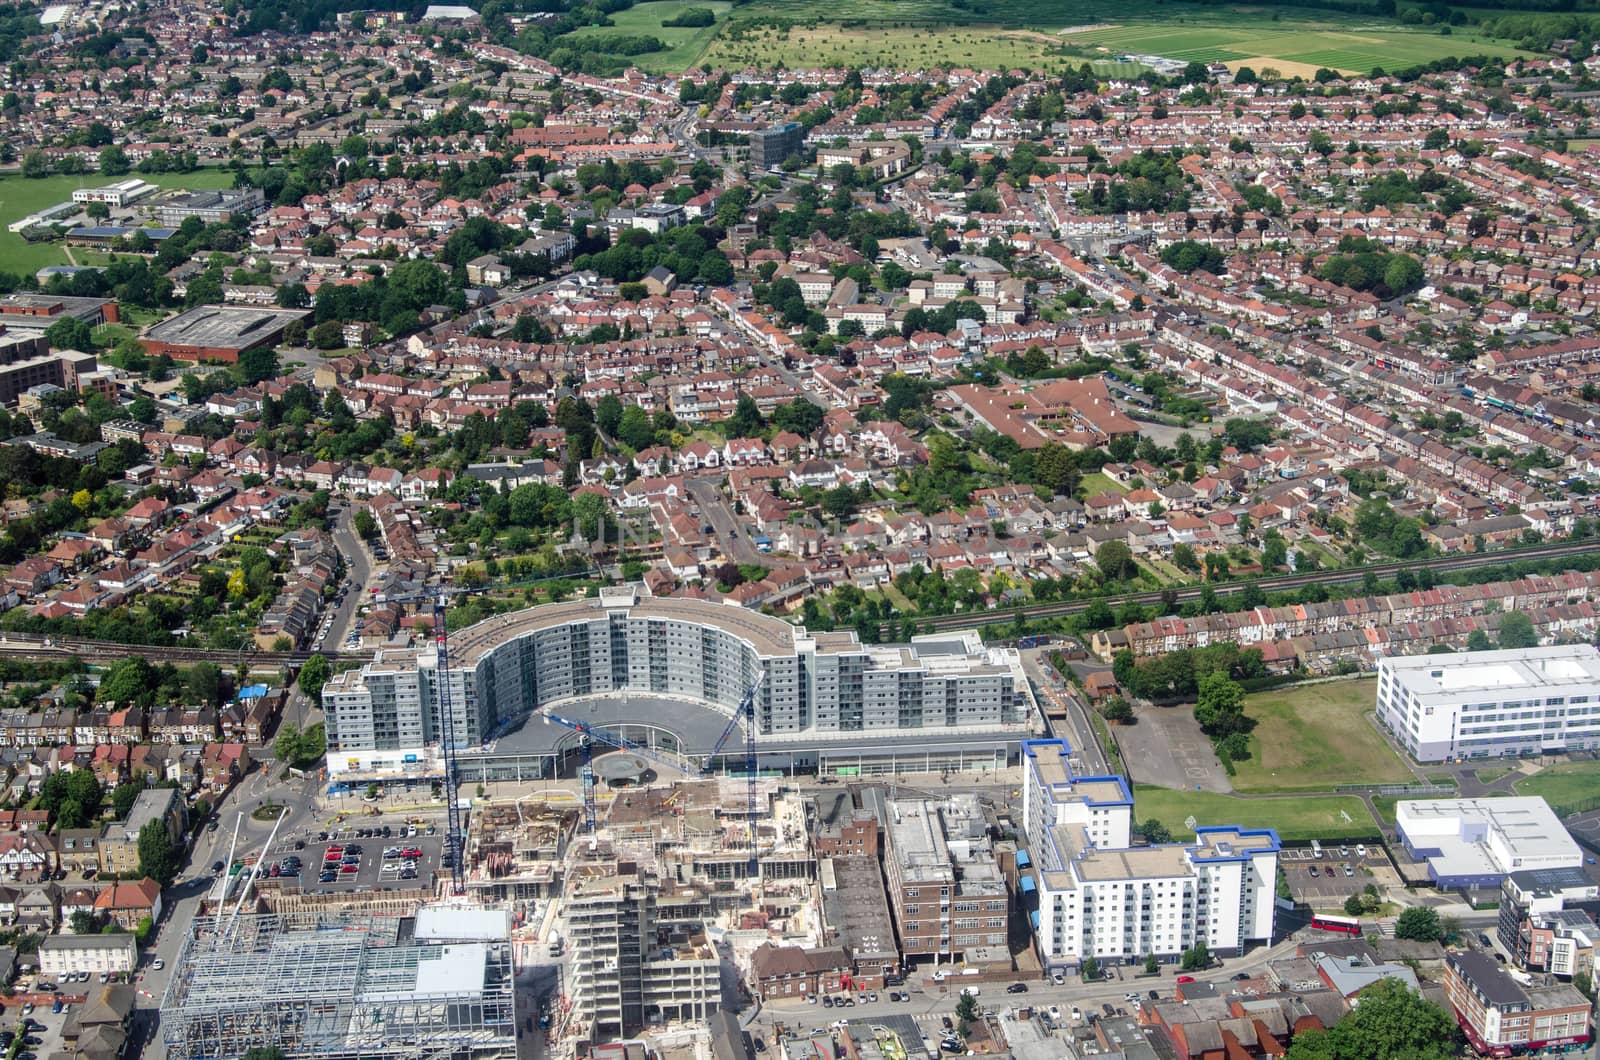 Aerial view of the London district of Hounslow with the landmark Blenheim Centre shopping centre and Piccadilly Line in the middle of the image.